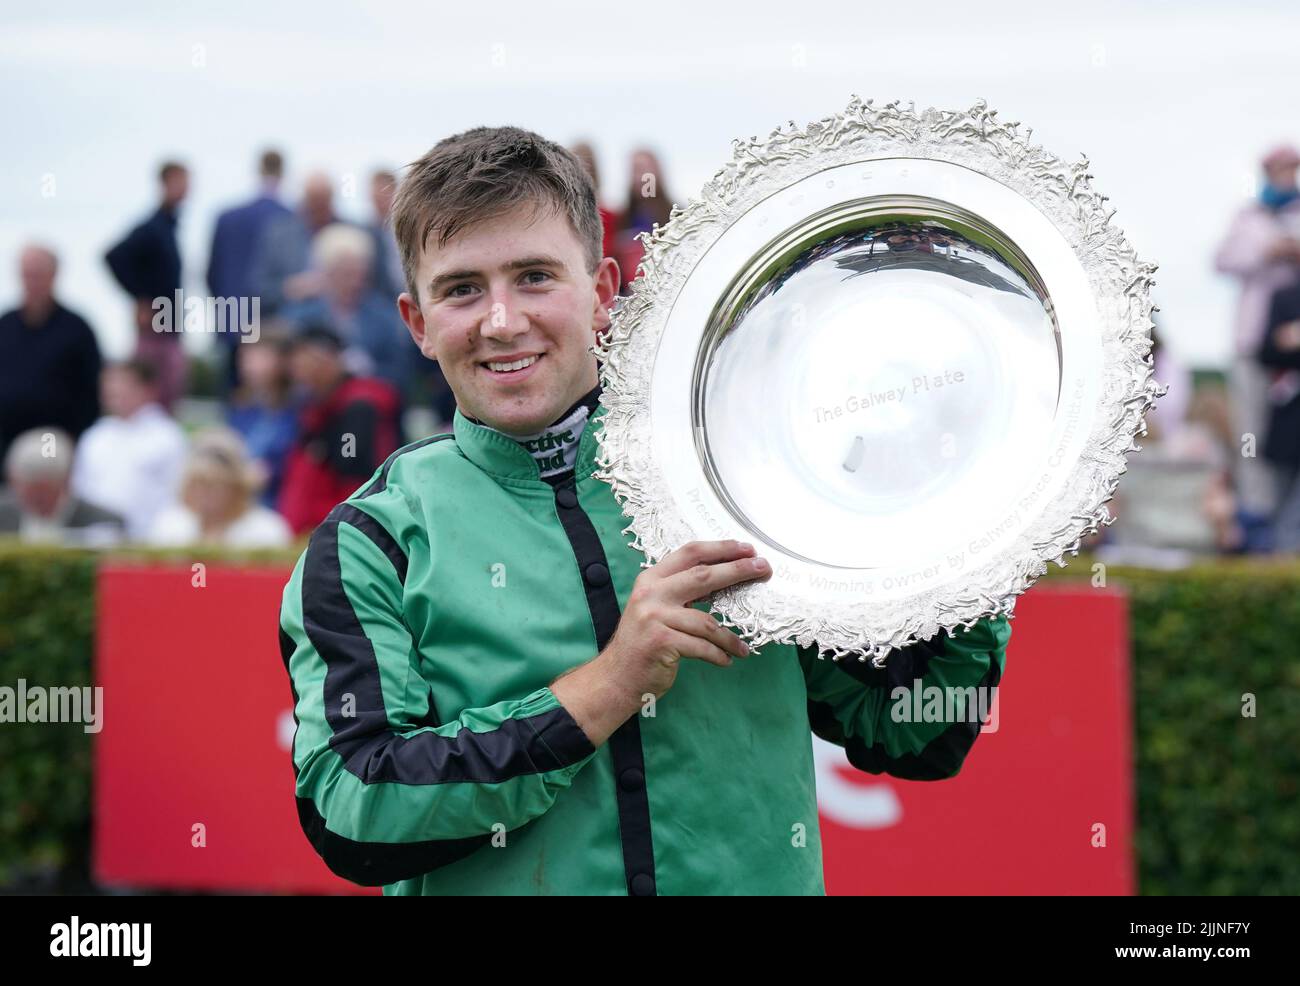 Jockey Jordan Gainford holds the trophy after winning the Tote Galway Plate on Hewick during day three of the Galway Races Summer Festival 2022 at Galway Racecourse in County Galway, Ireland. Picture date: Wednesday July 27, 2022. Stock Photo